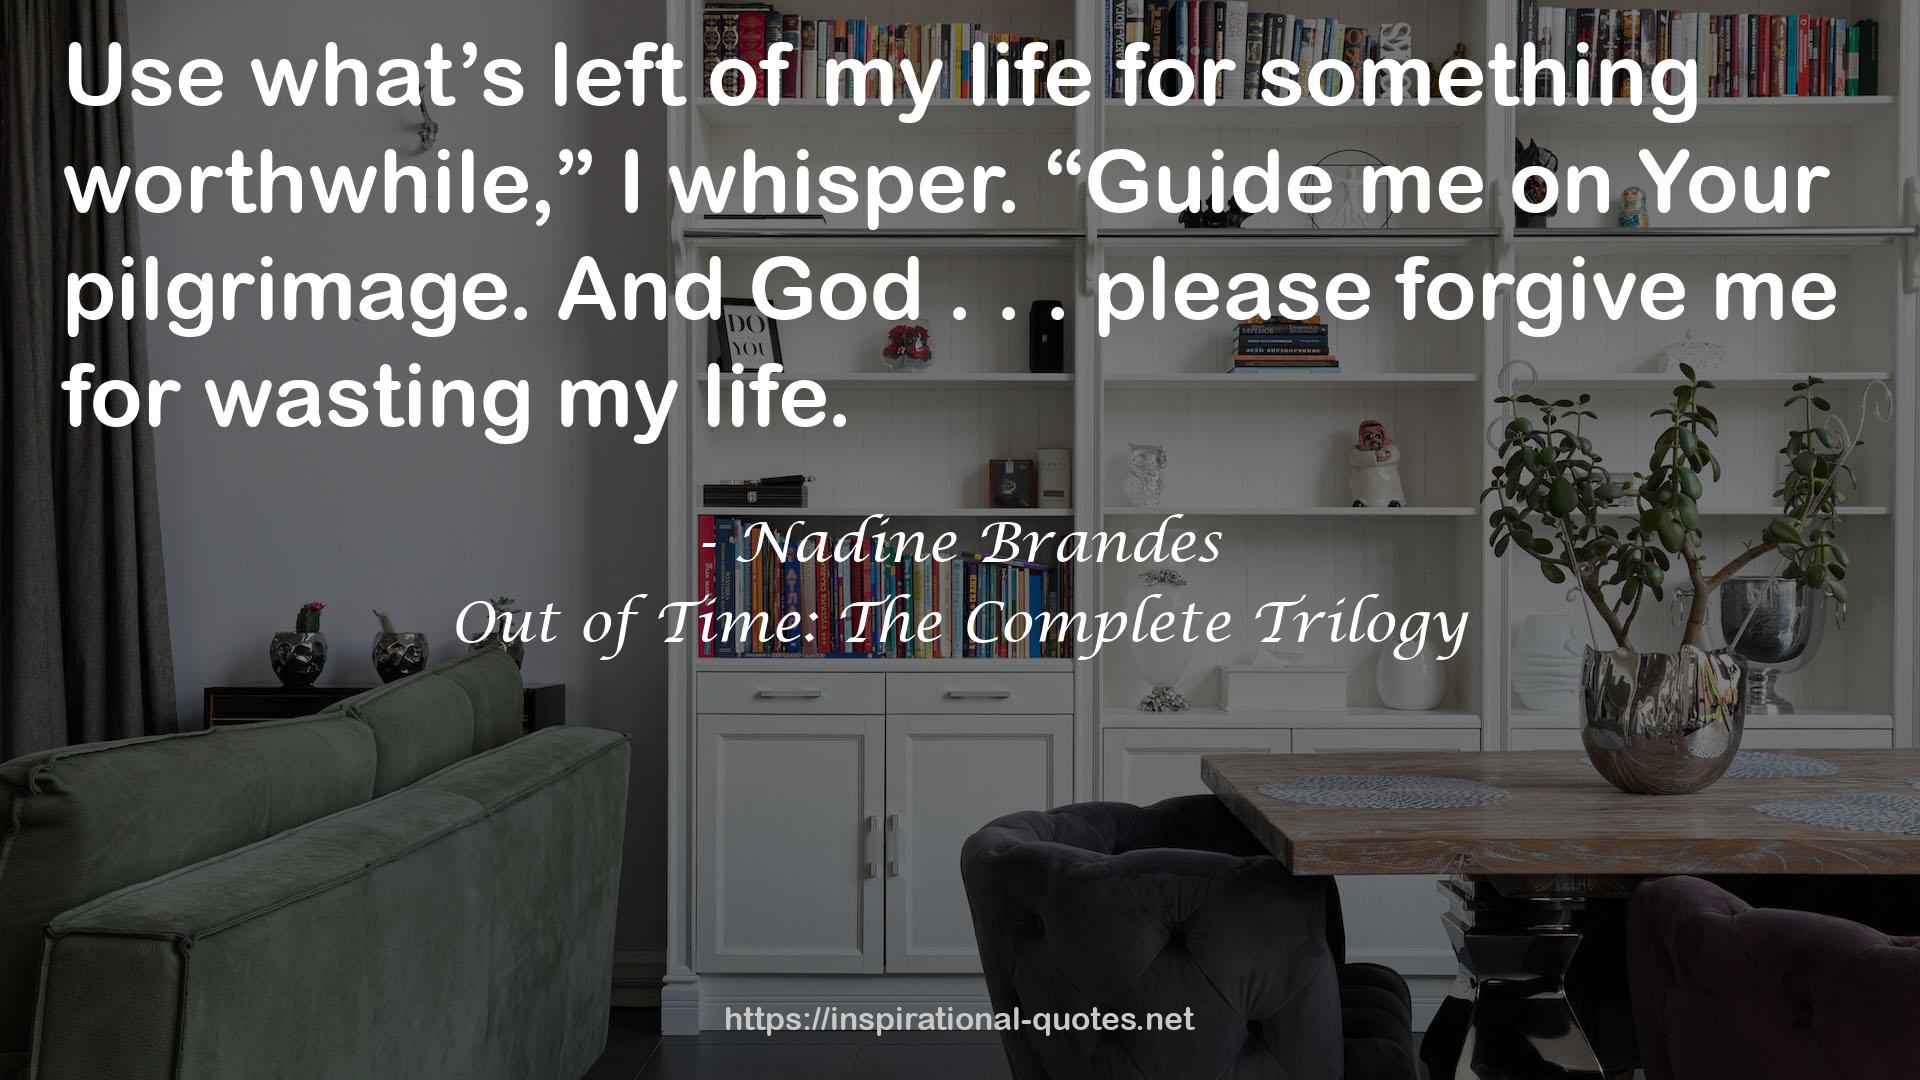 Out of Time: The Complete Trilogy QUOTES